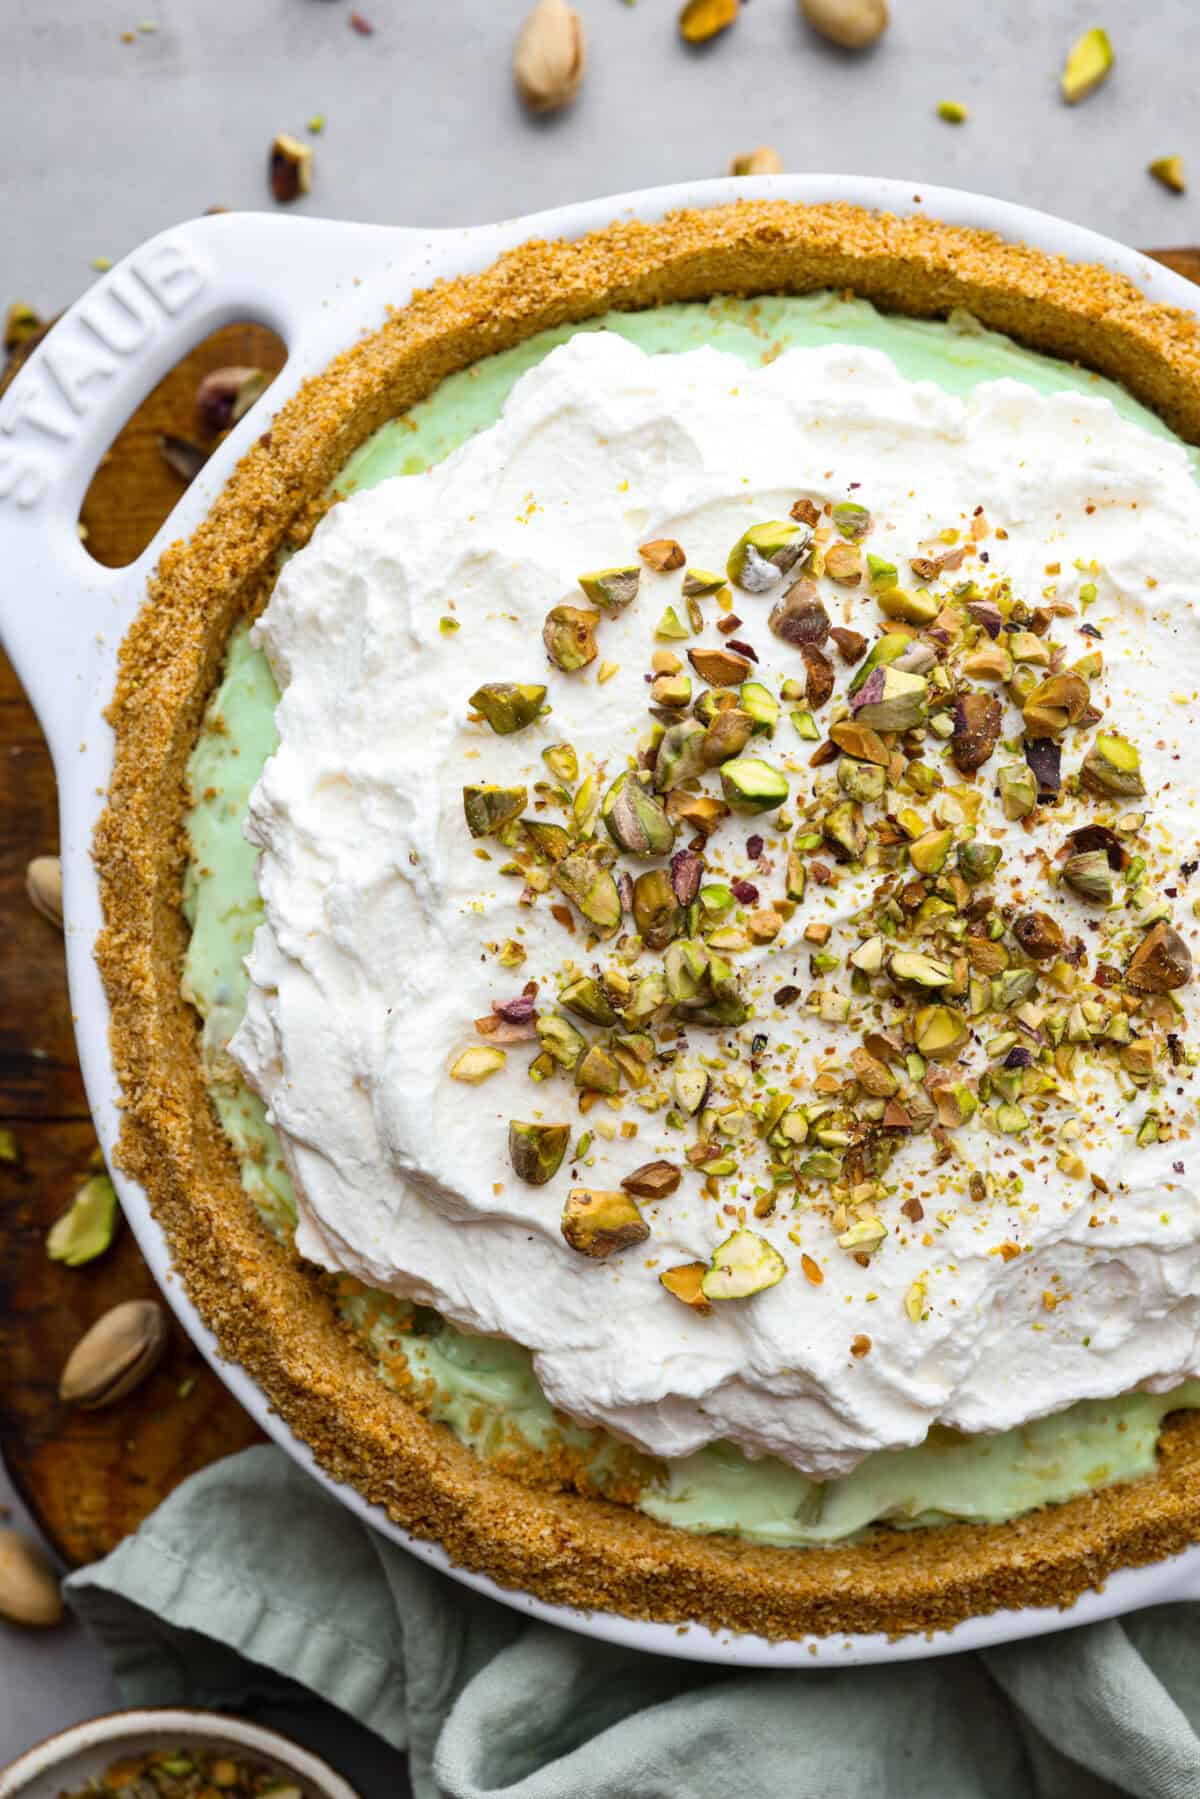 Top view of the no-bake pistachio cream pie garnished with pistachios.